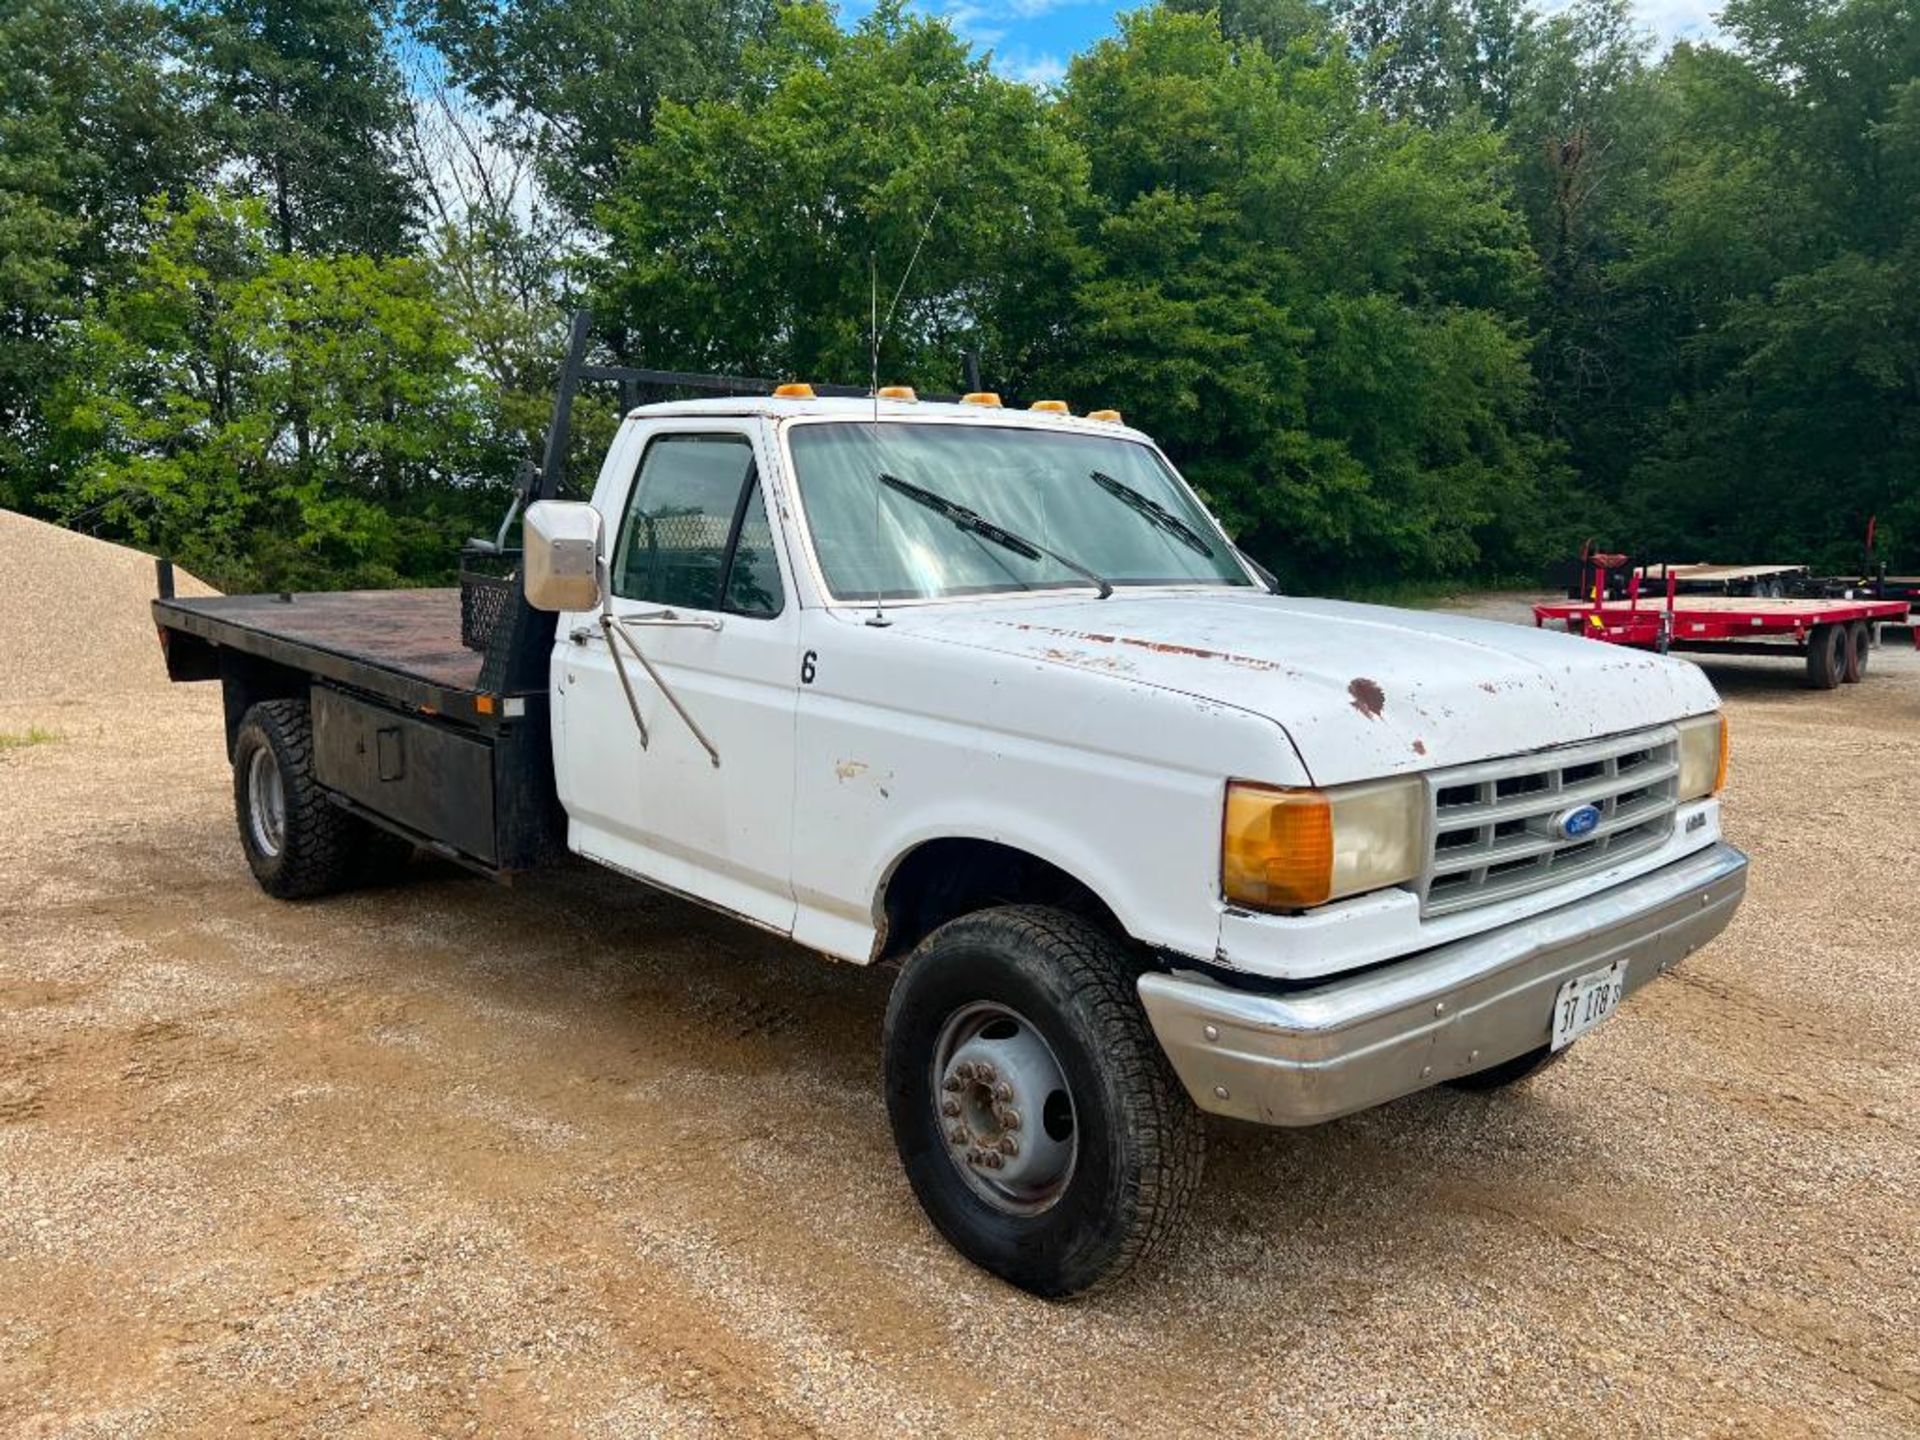 1989 Ford Dually Flat Bed Truck, VIN #2FDLF4763KCB49239, Miles 72,251, Manual Transmission, 460 Gas - Image 2 of 18